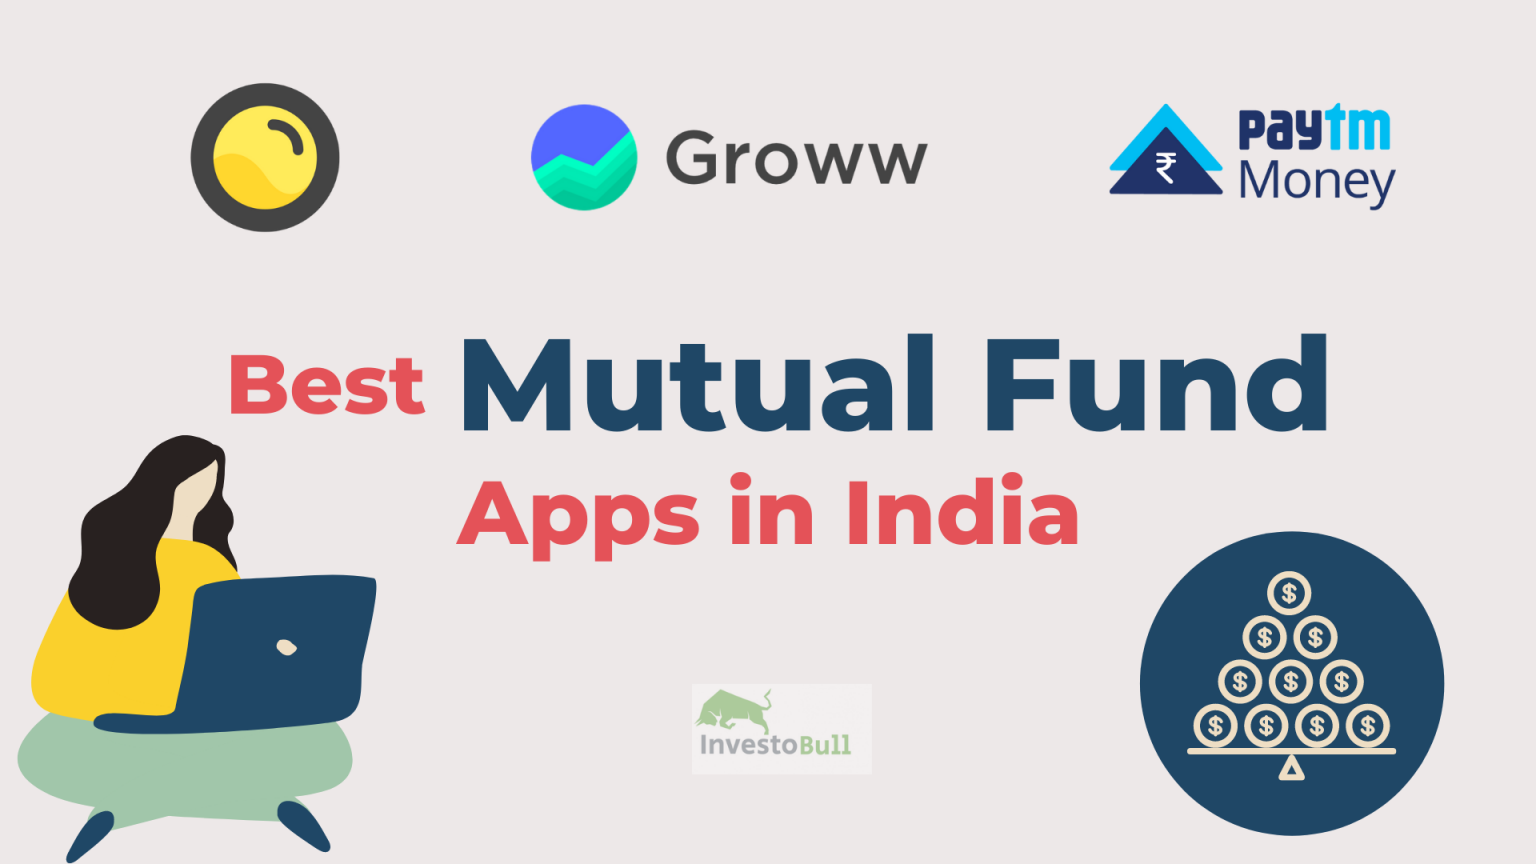 Best Mutual Fund Apps in India